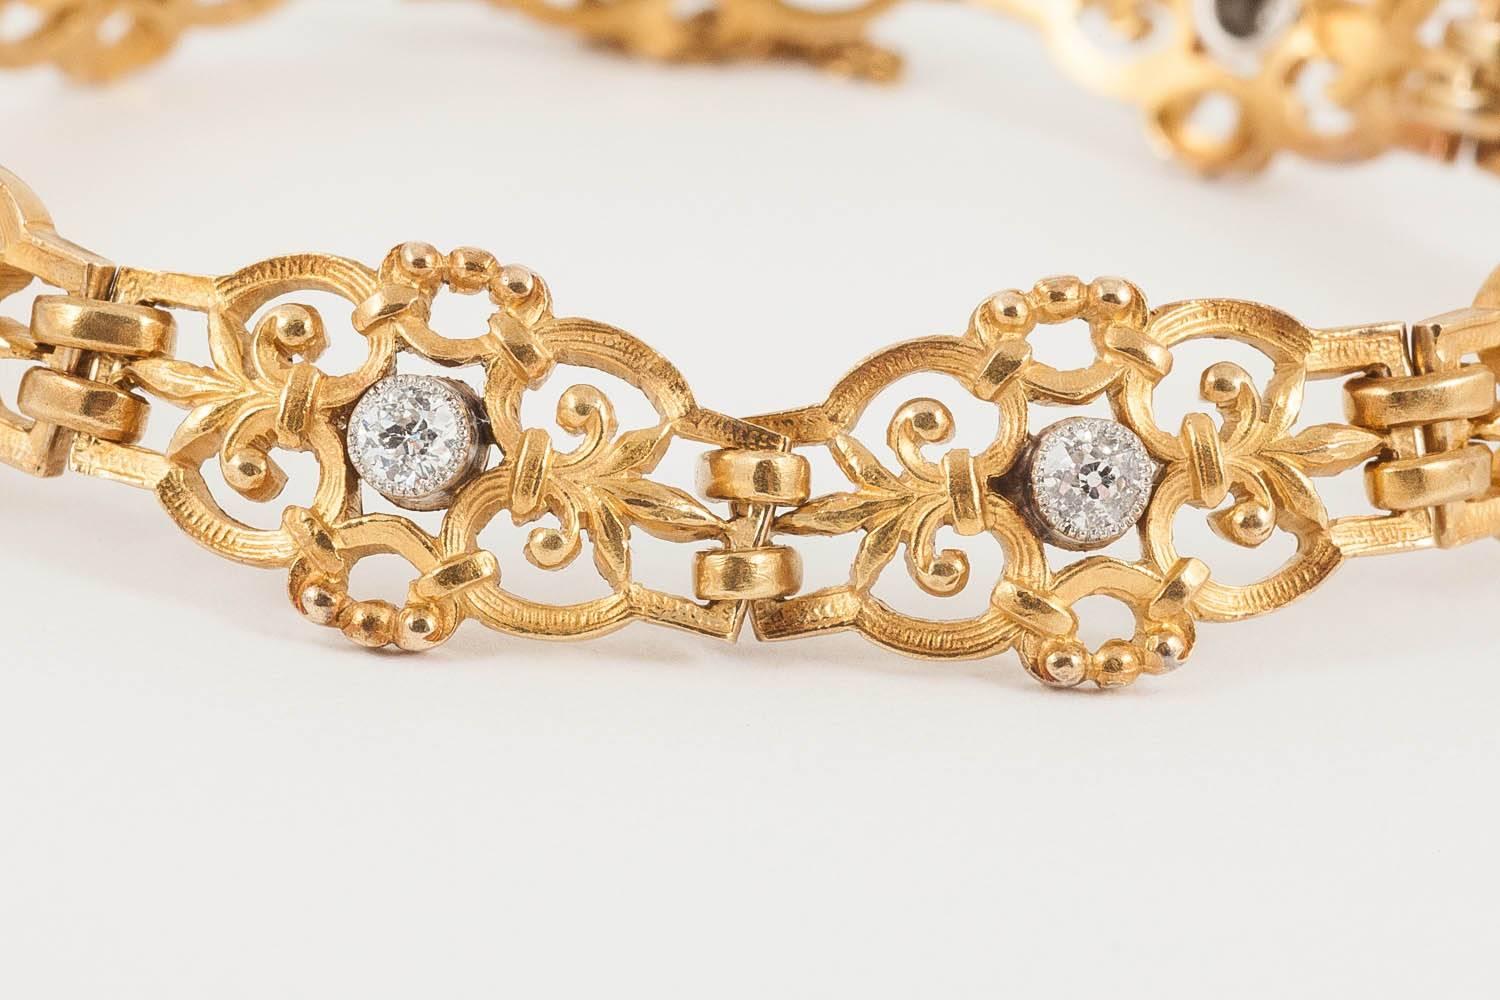 A heavy quality,18ct yellow gold bracelet of openwork,fleur de lys panels,each with a platinum set brilliant cut diamond centre,in perfect condition ,French marked c,1900